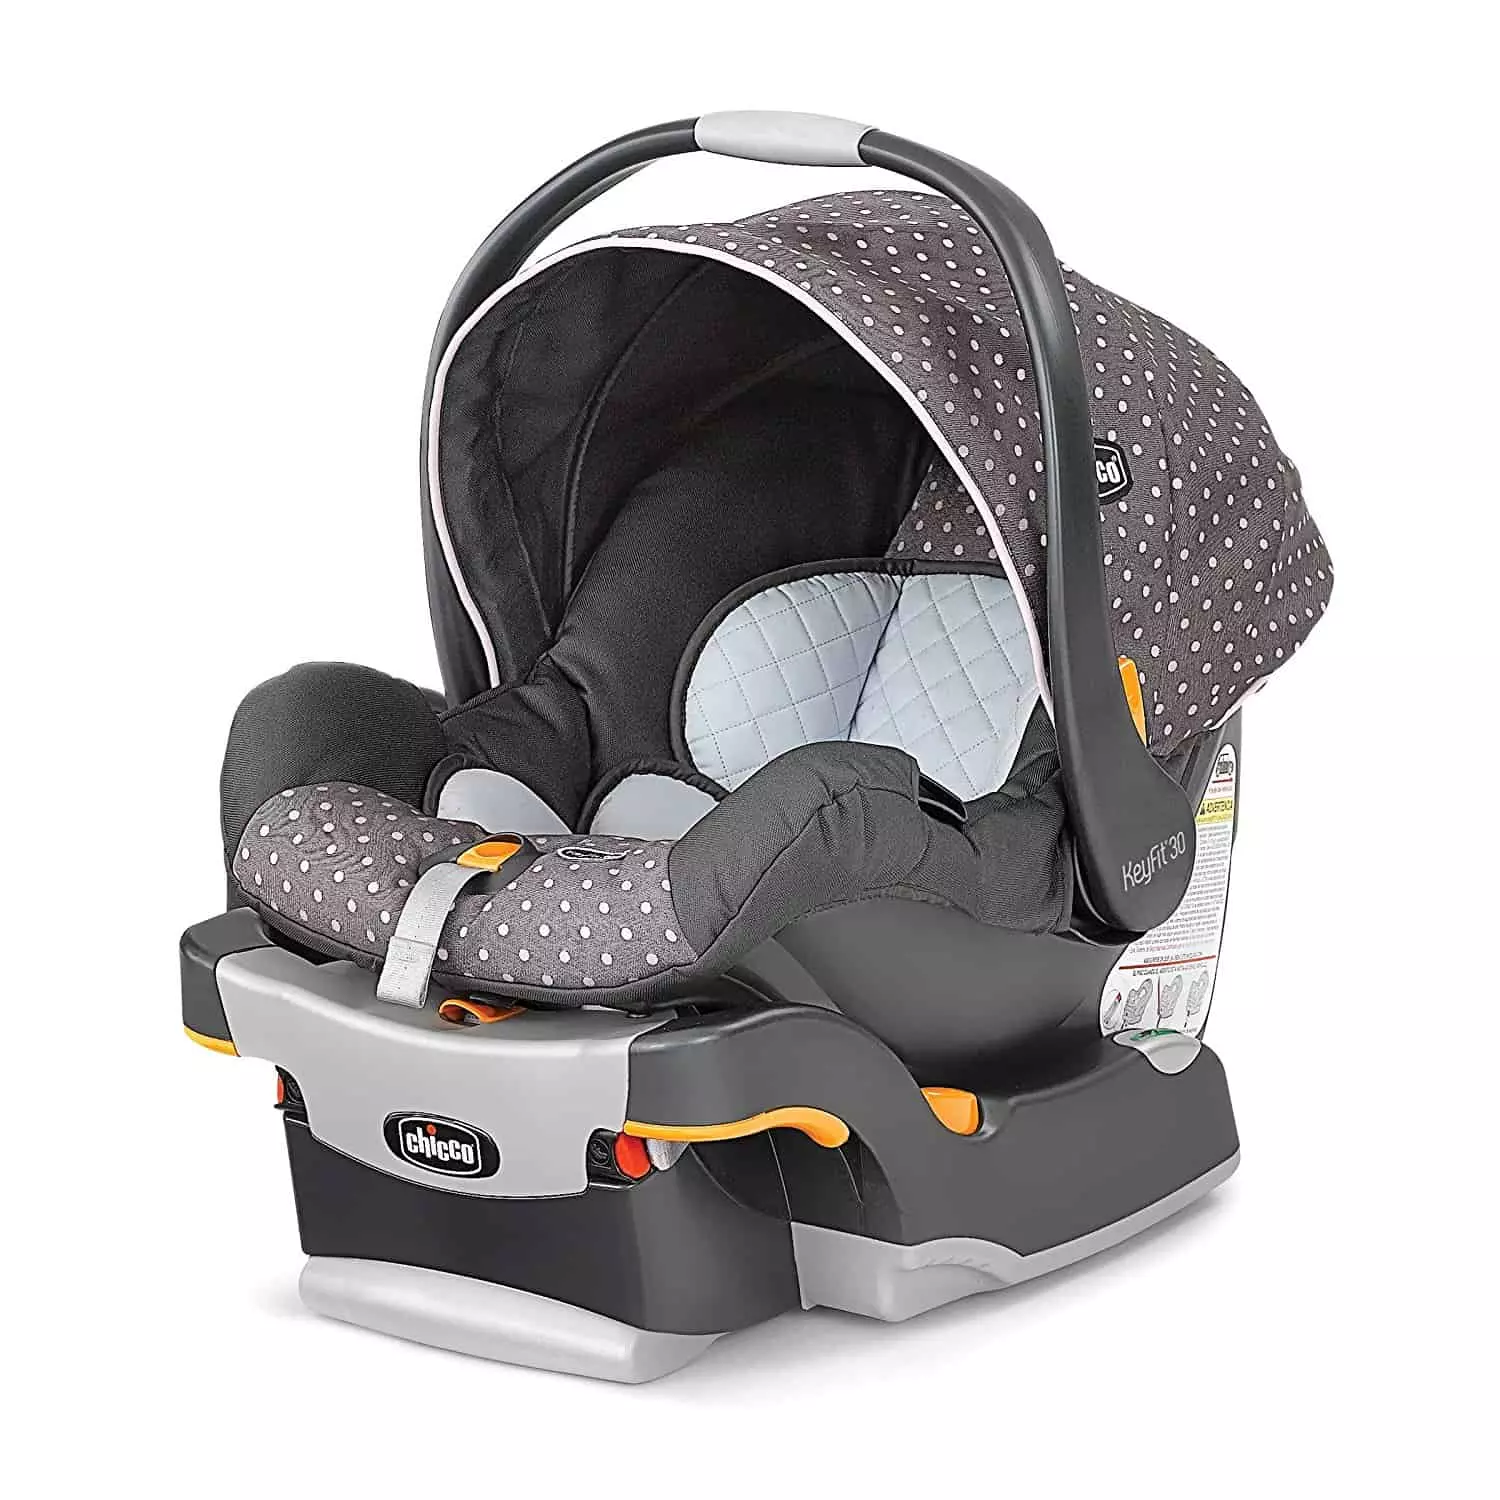 The Best Infant Car Seat Y Baby, What Is The Best Infant Car Seat On Market